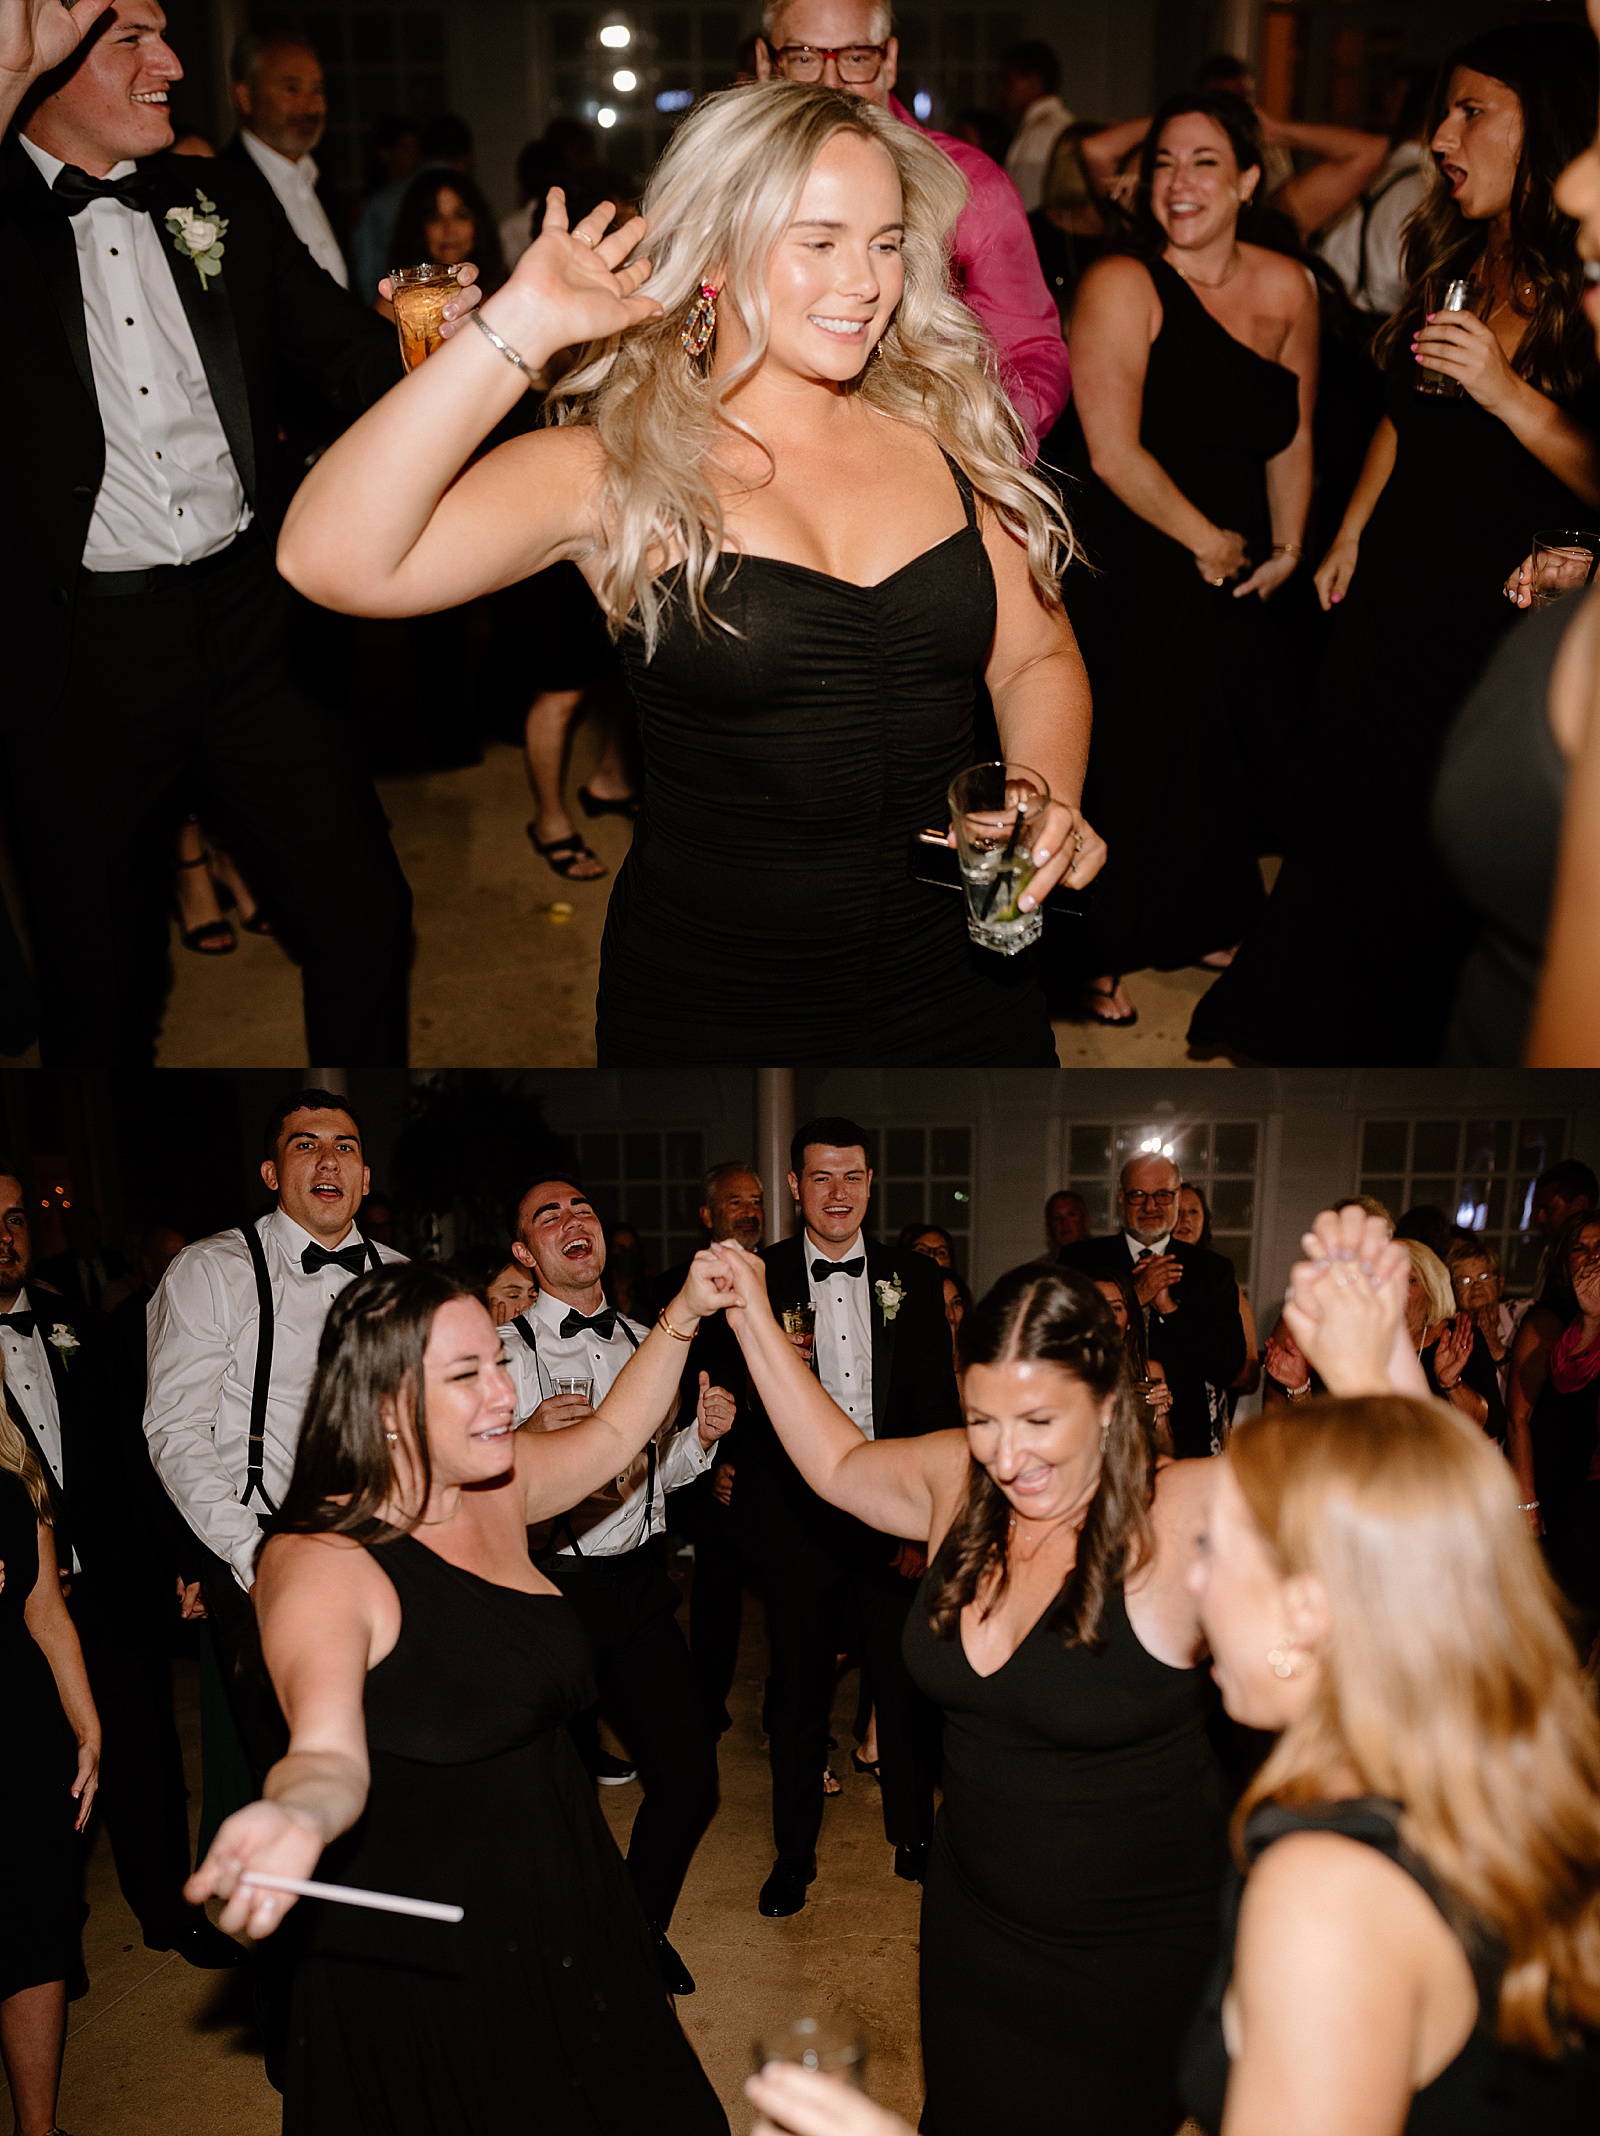 Bridesmaids dressed in black dancing on a dance floor at Indiana wedding reception. 